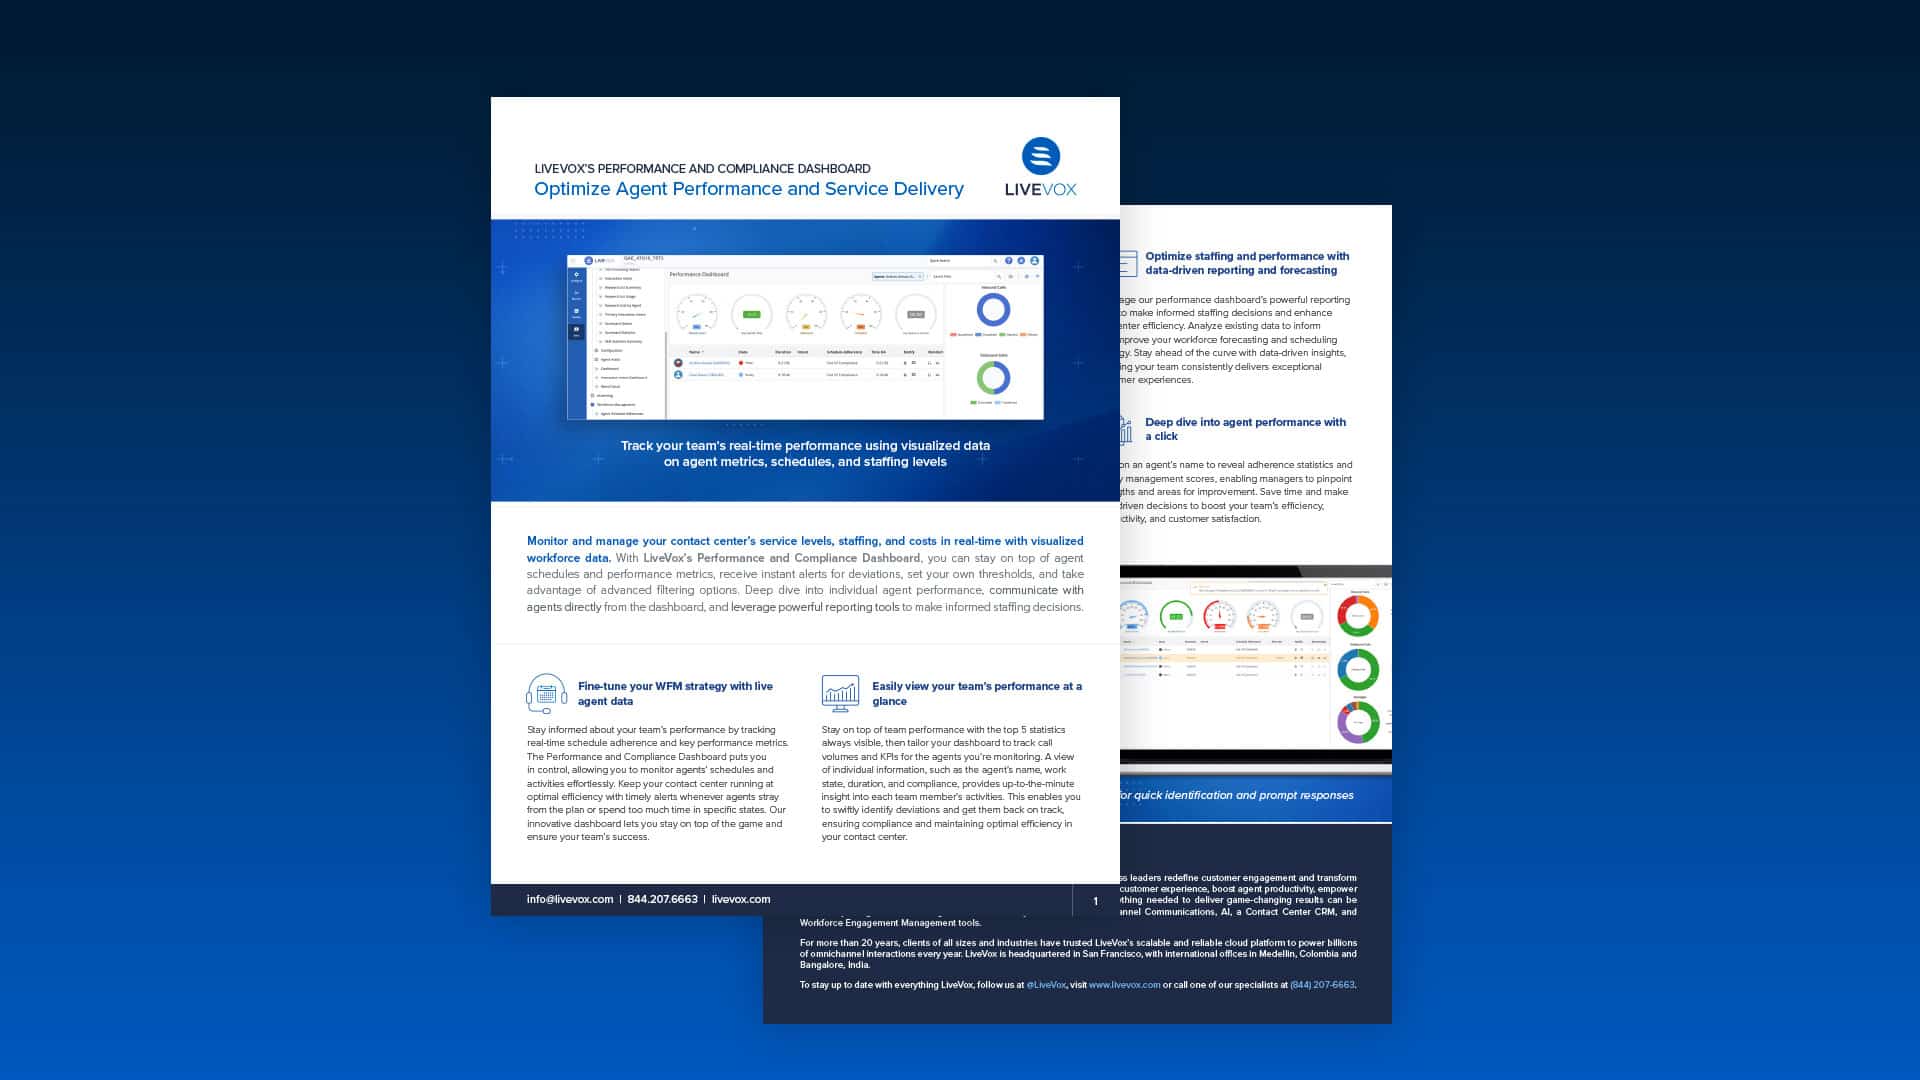 LiveVox [Performance and Compliance Dashboard / product brief]